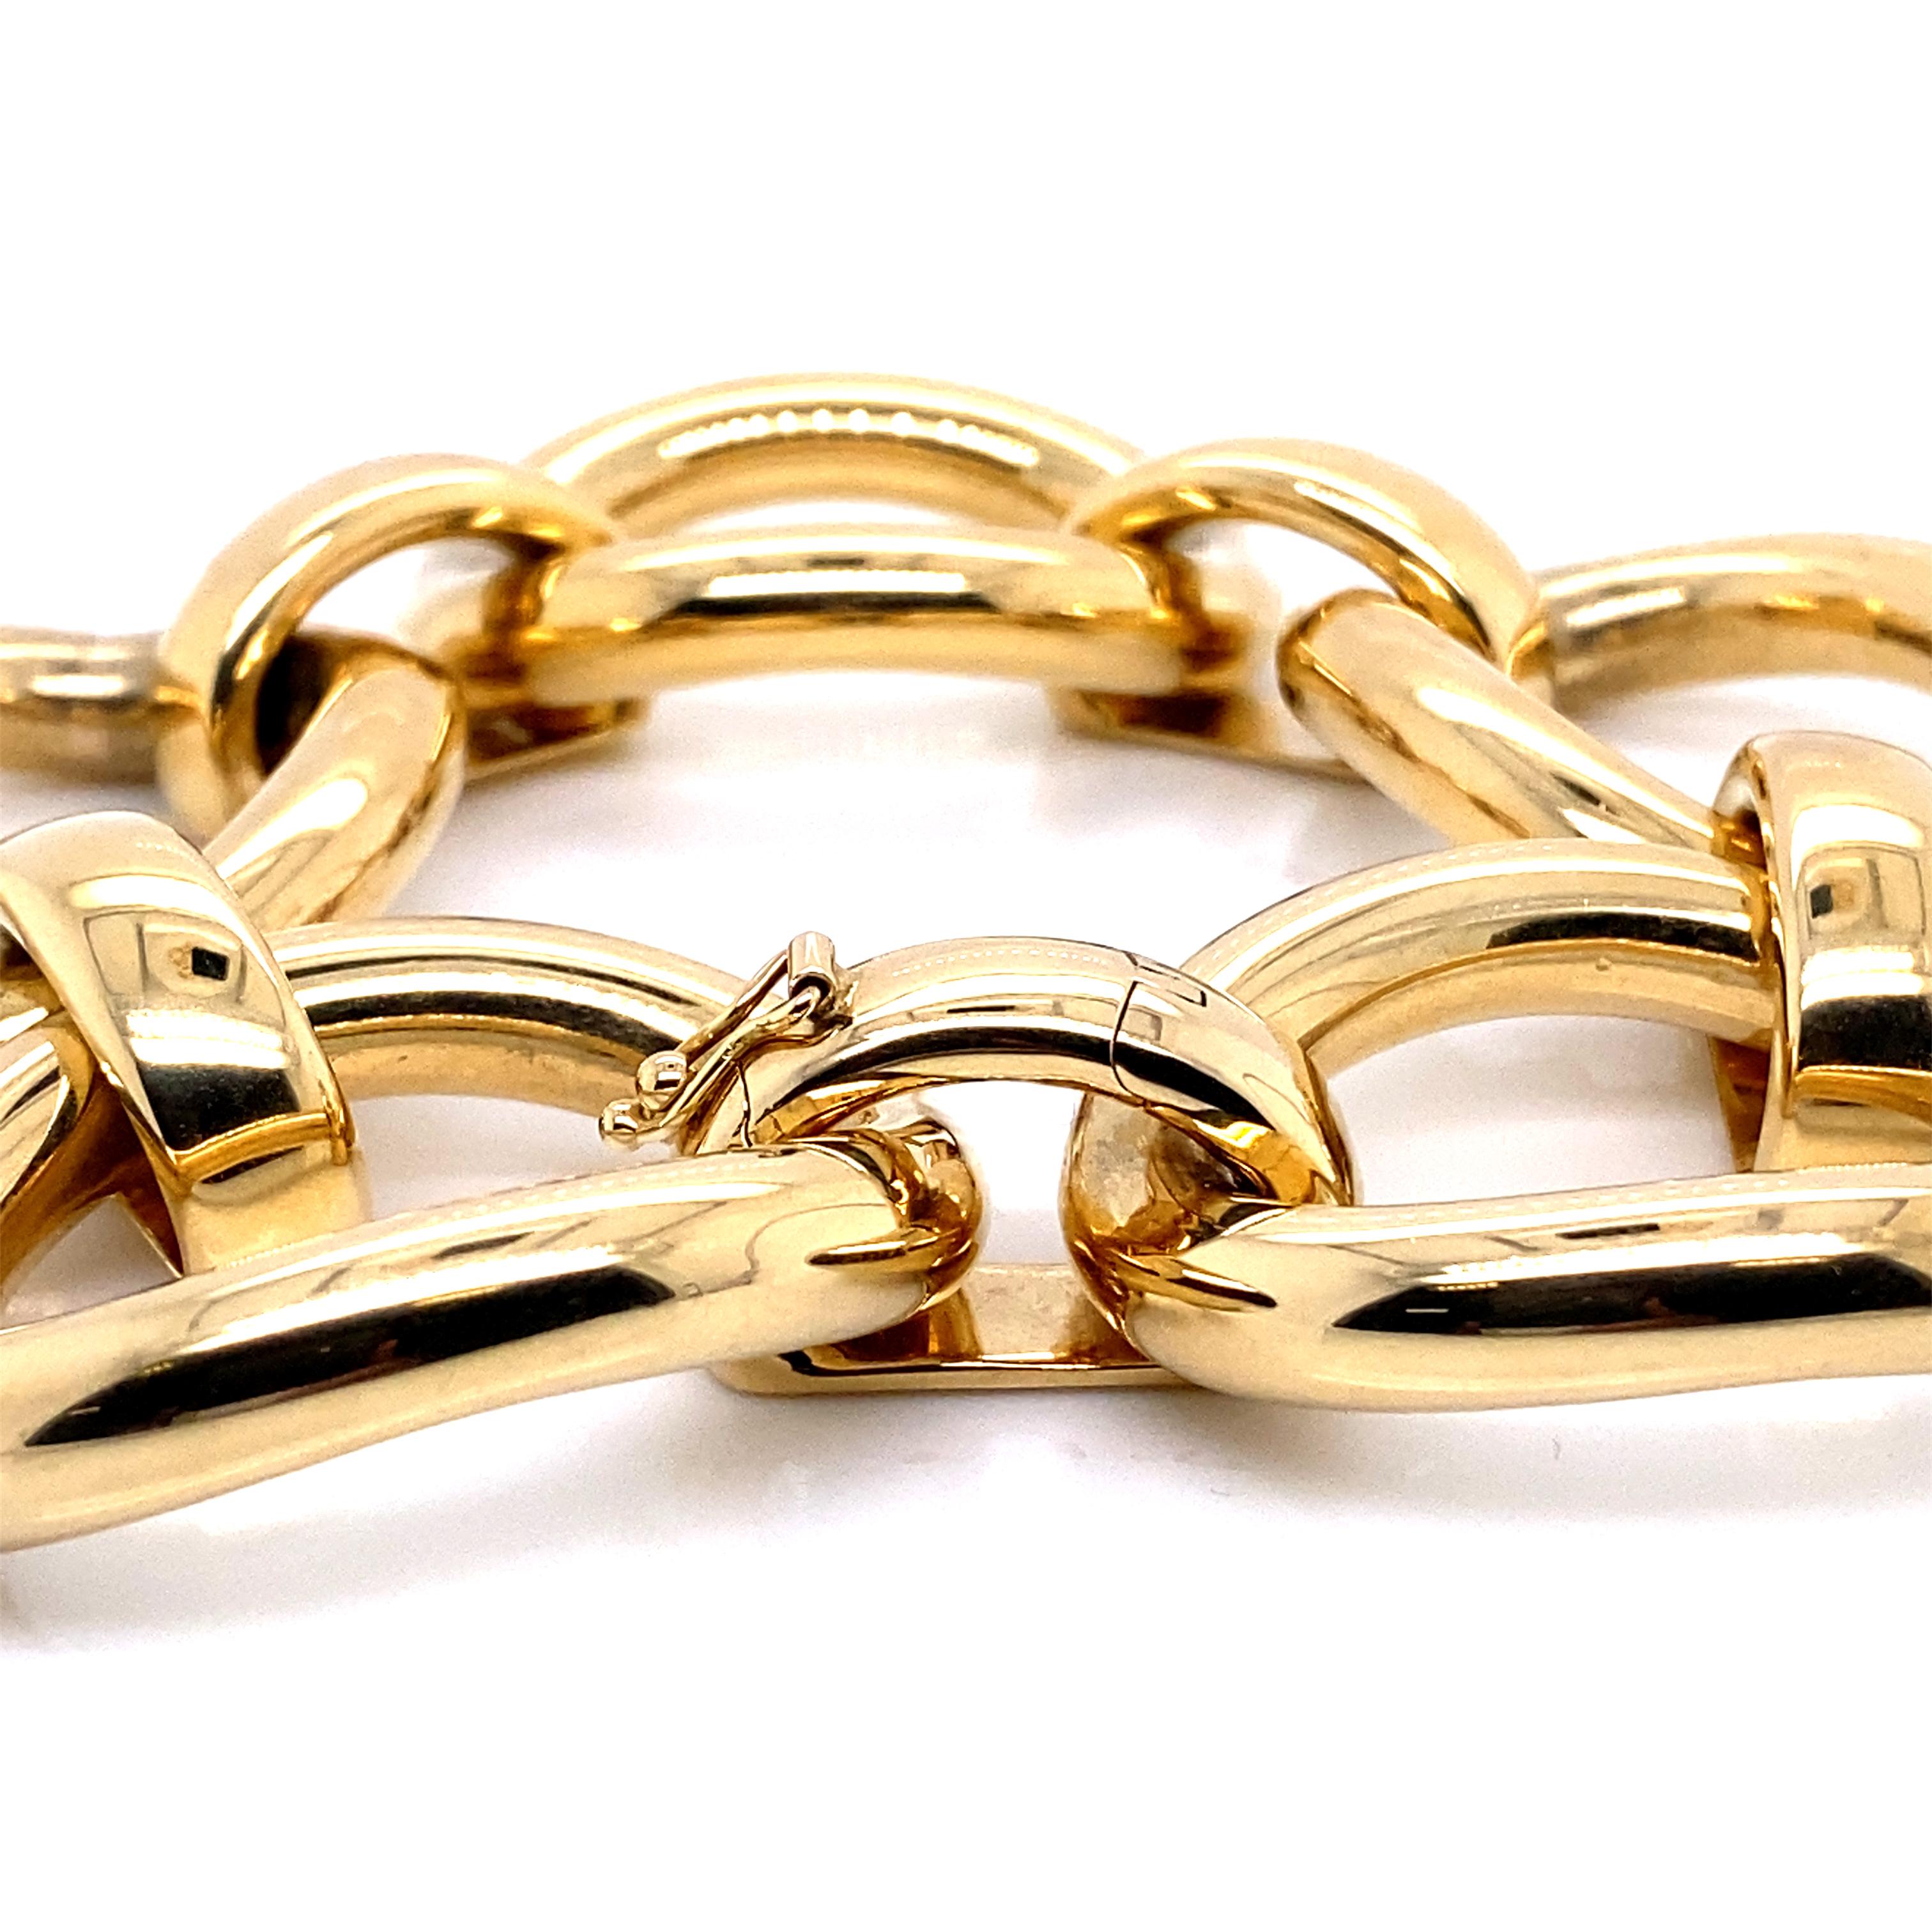 Art Deco Yellow Gold Bracelet Accompanied by Oval Links with Gadroons